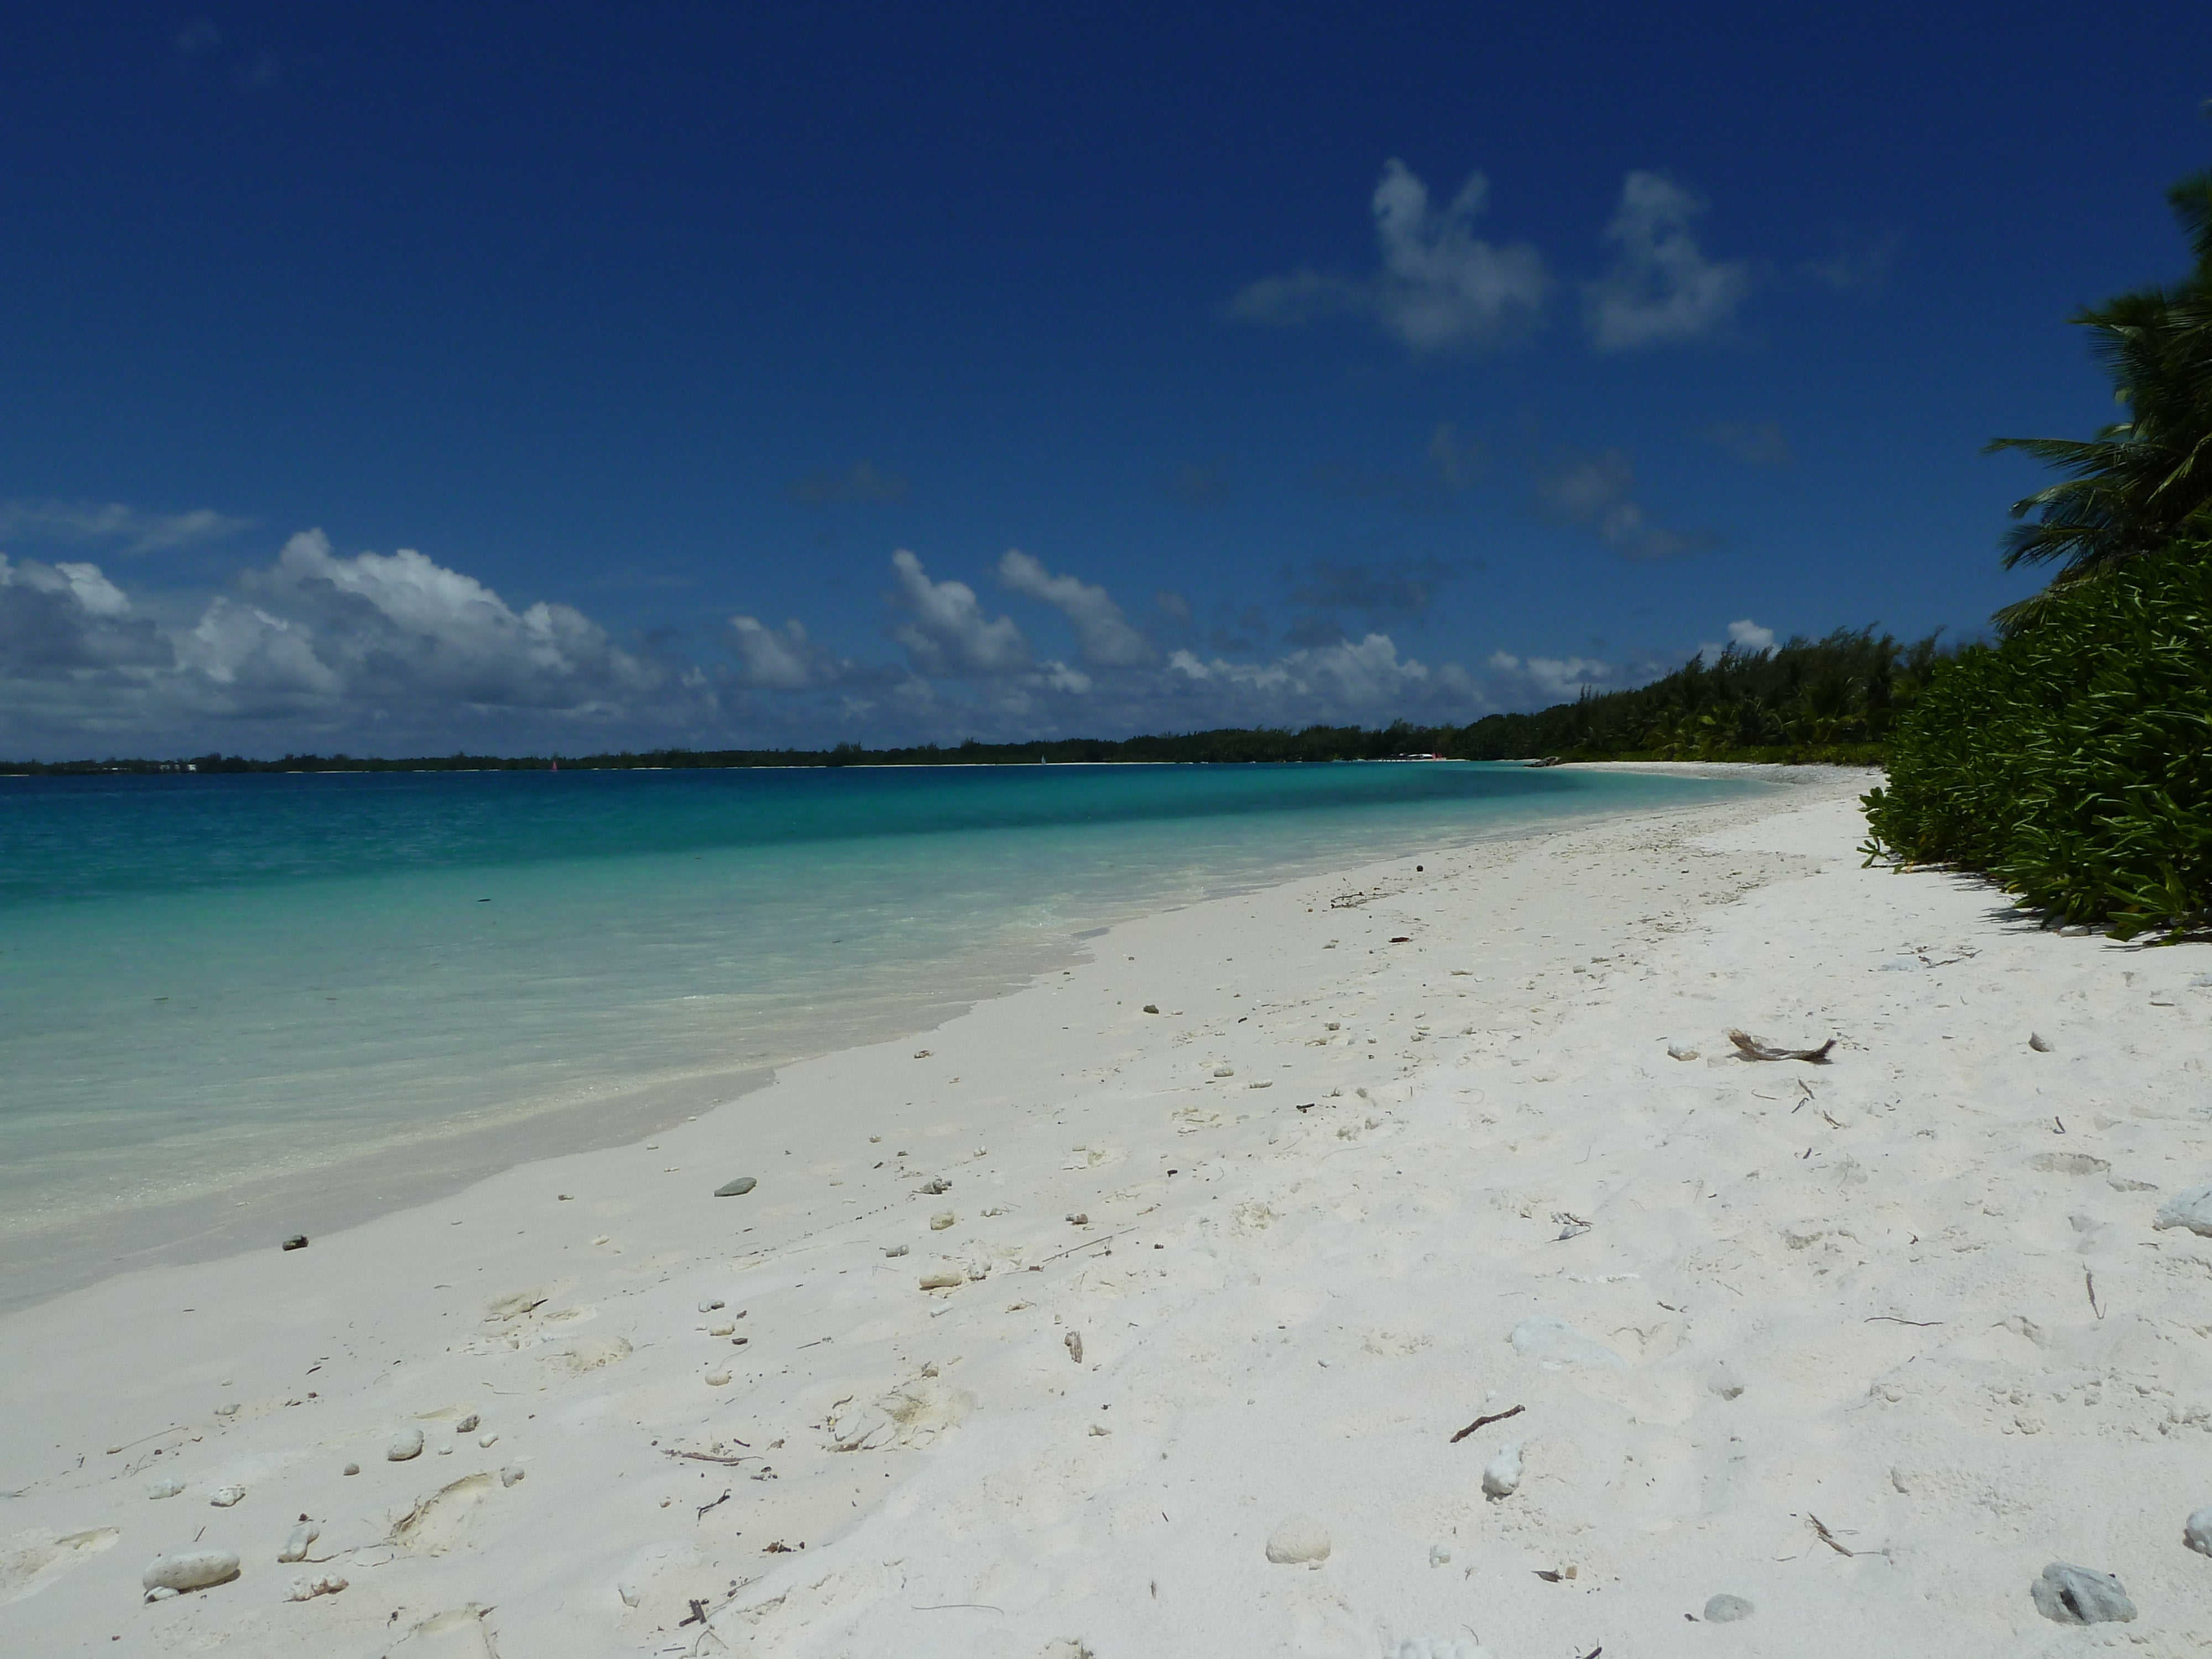 A beach on Diego Garcia, the largest of the Chagos Islands